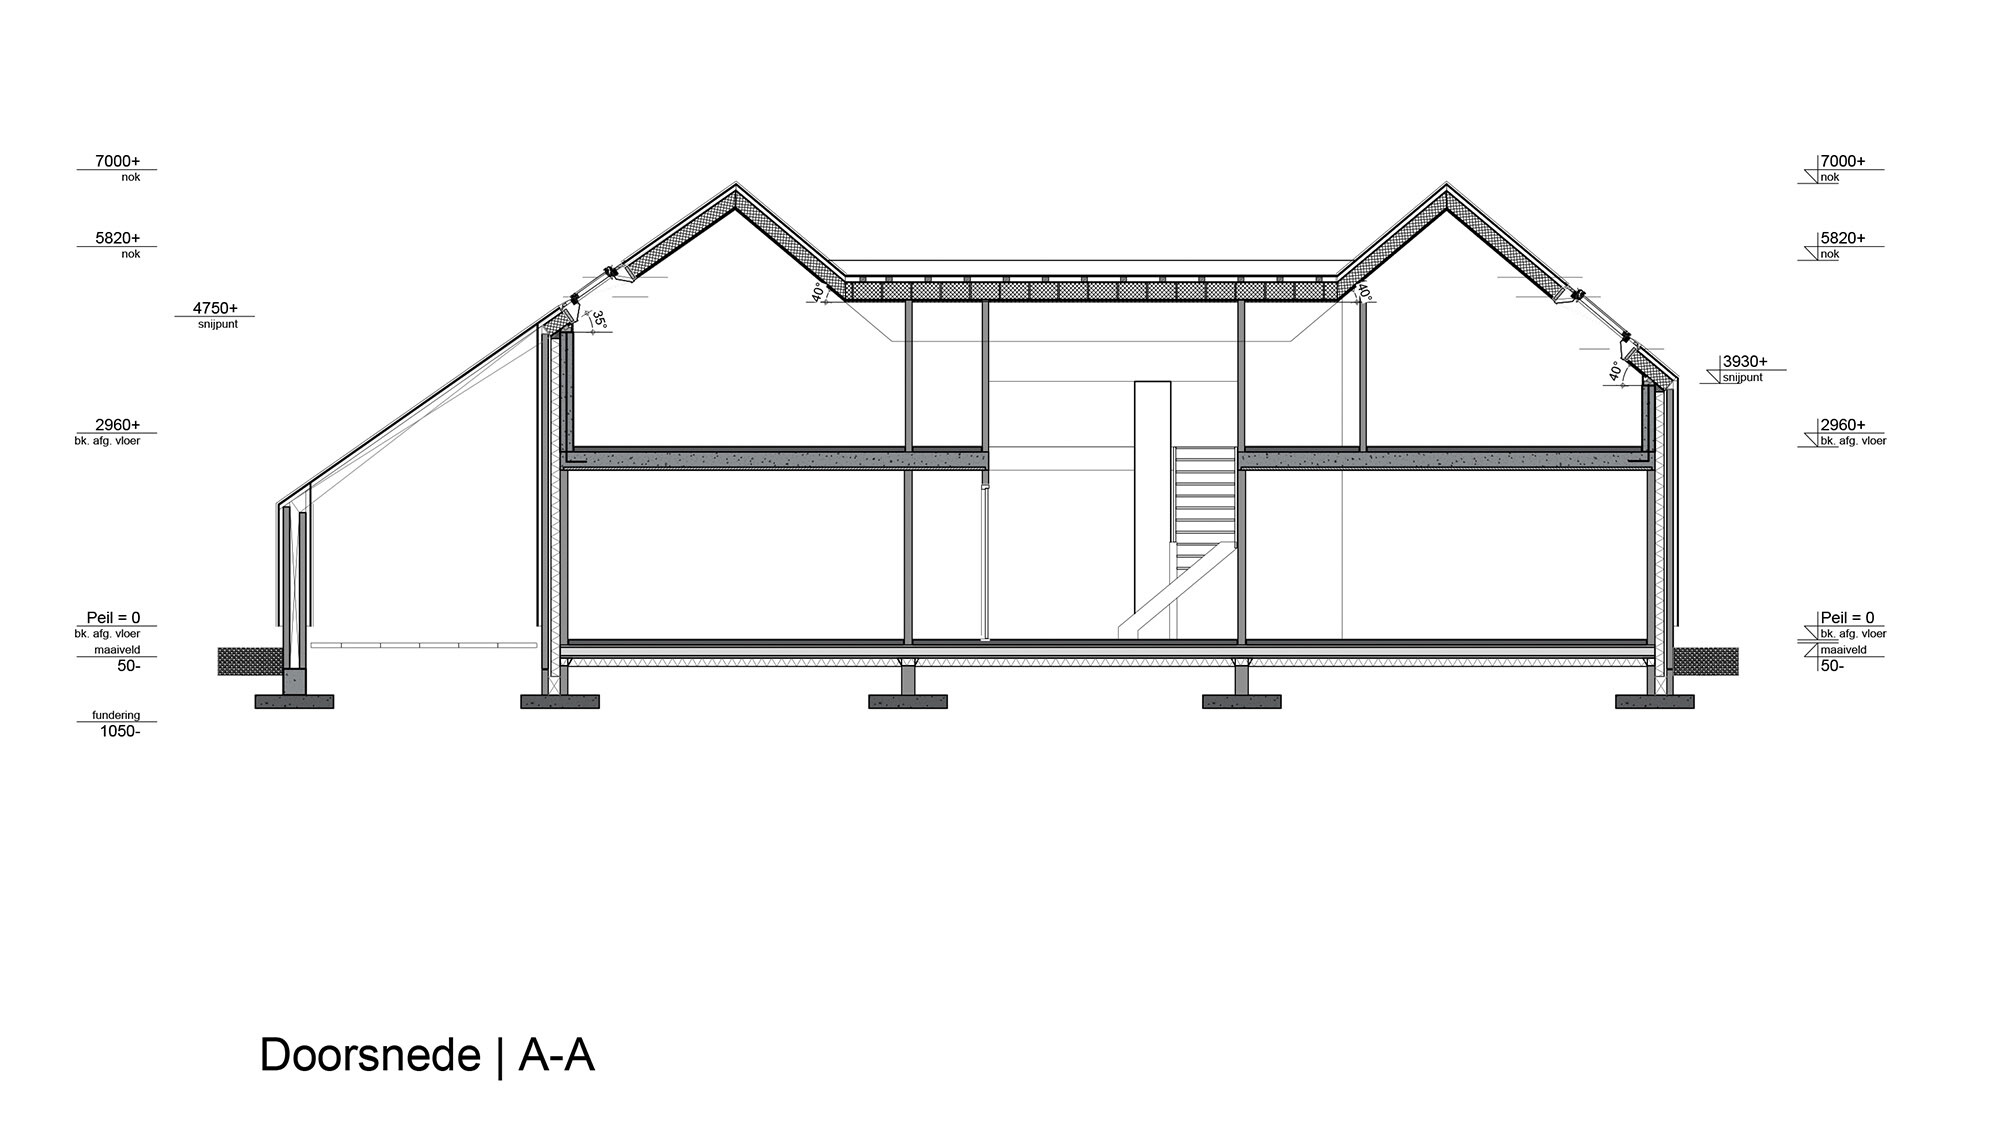 Sectional drawing of a detached house showing the internal structure with different levels and ceiling heights. The drawing shows the pitched roof, the beams and columns, the room heights and the foundations. In addition, the dimensions for the height points such as gable ends and floor levels are noted in detail. A staircase connecting the floors is shown in the centre of the house. The illustration is very detailed and technical, with all relevant dimensions for the construction.